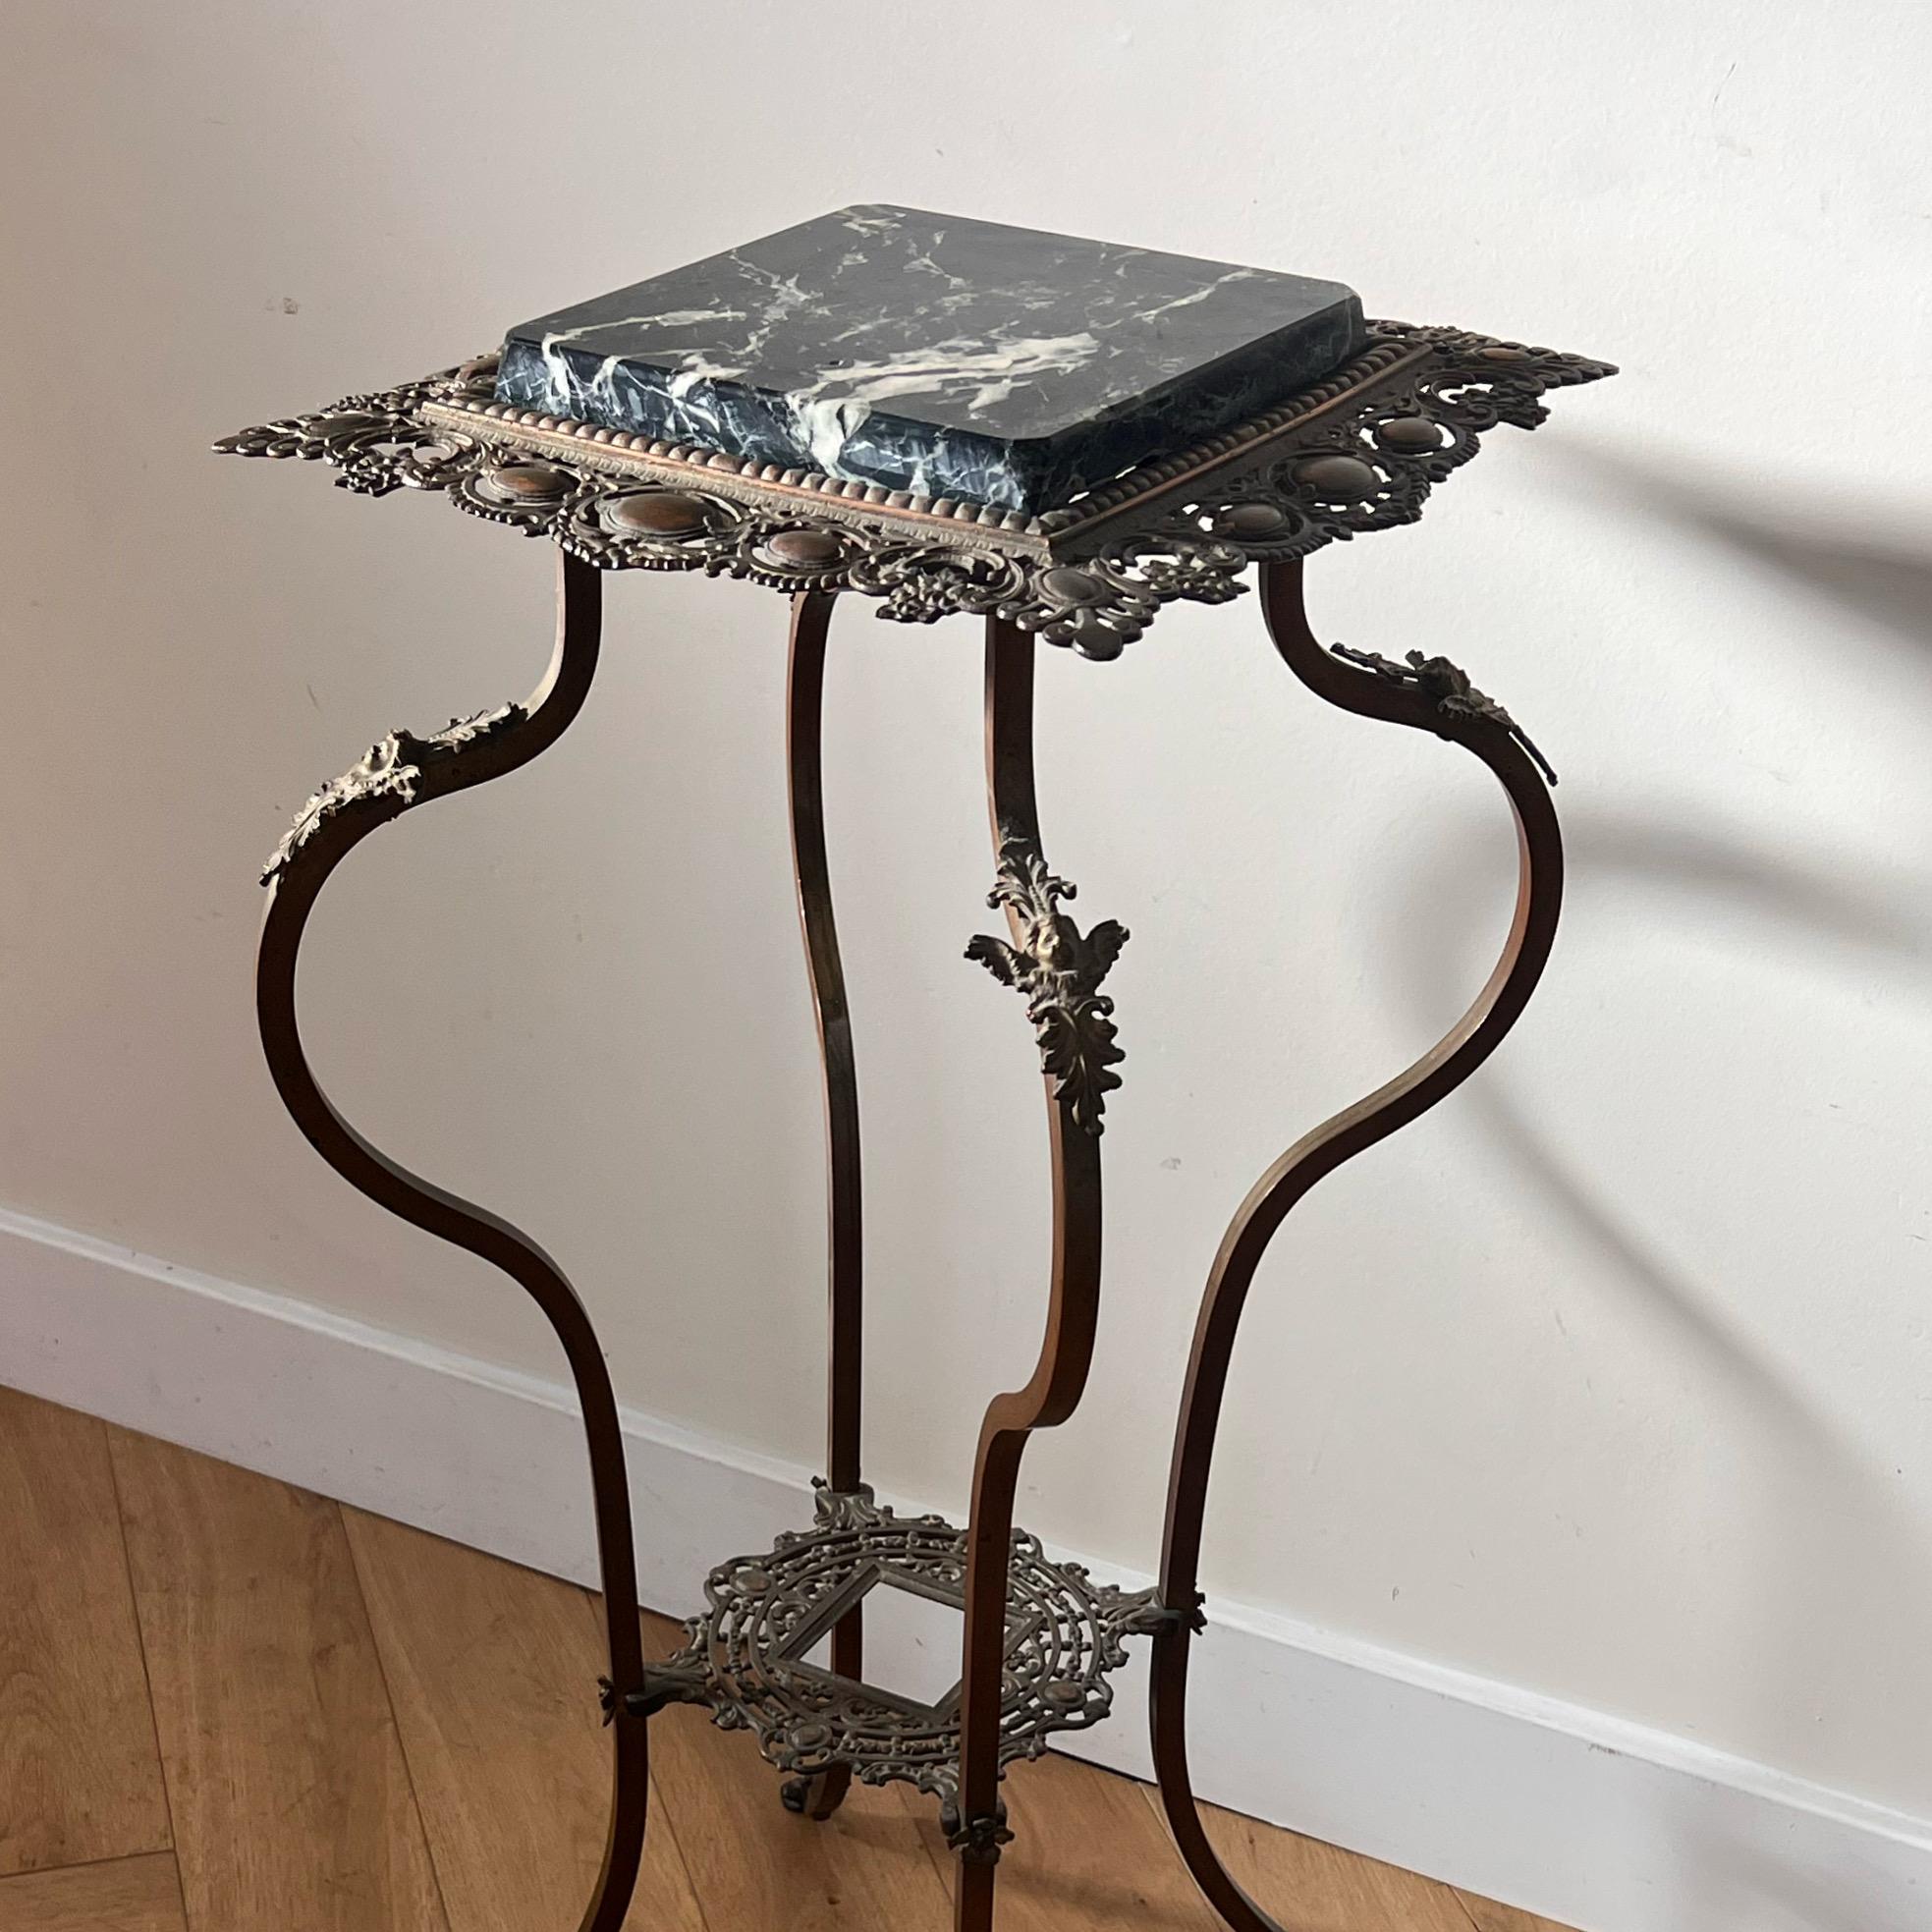 A stunning Victorian jardinière occasional table / pedestal crafted of a metal base - brass - with a black marble top inlay. Circa fin de siècle late 1800s, or perhaps début de siècle, this piece marries elements of belle époque with art nouveau,